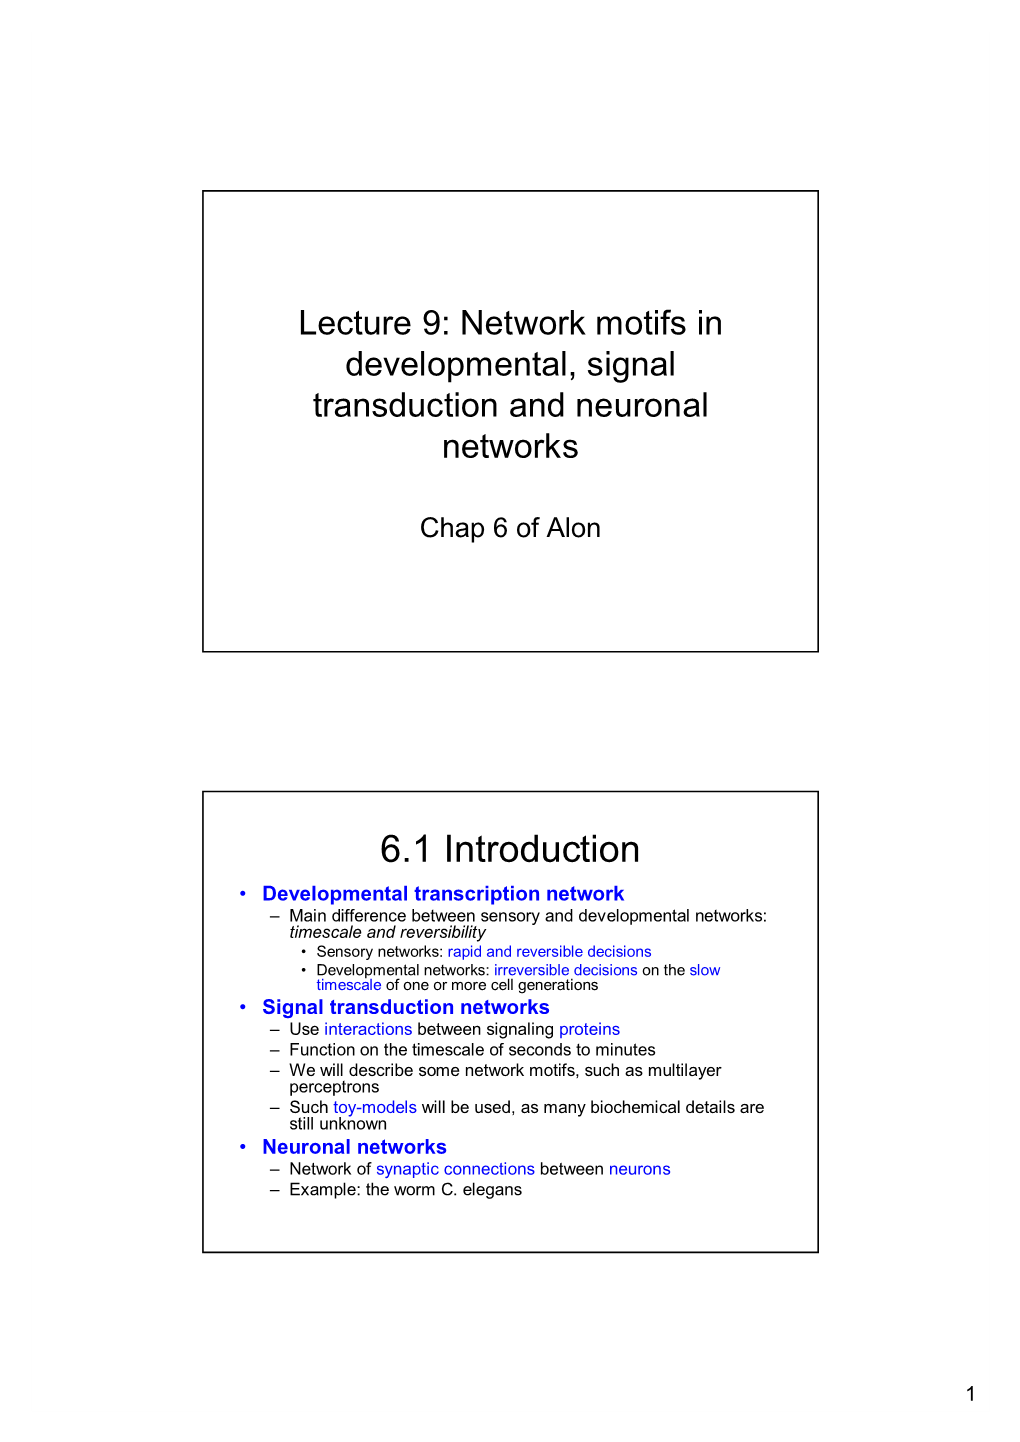 Lecture 9: Network Motifs in Developmental, Signal Transduction and Neuronal Networks